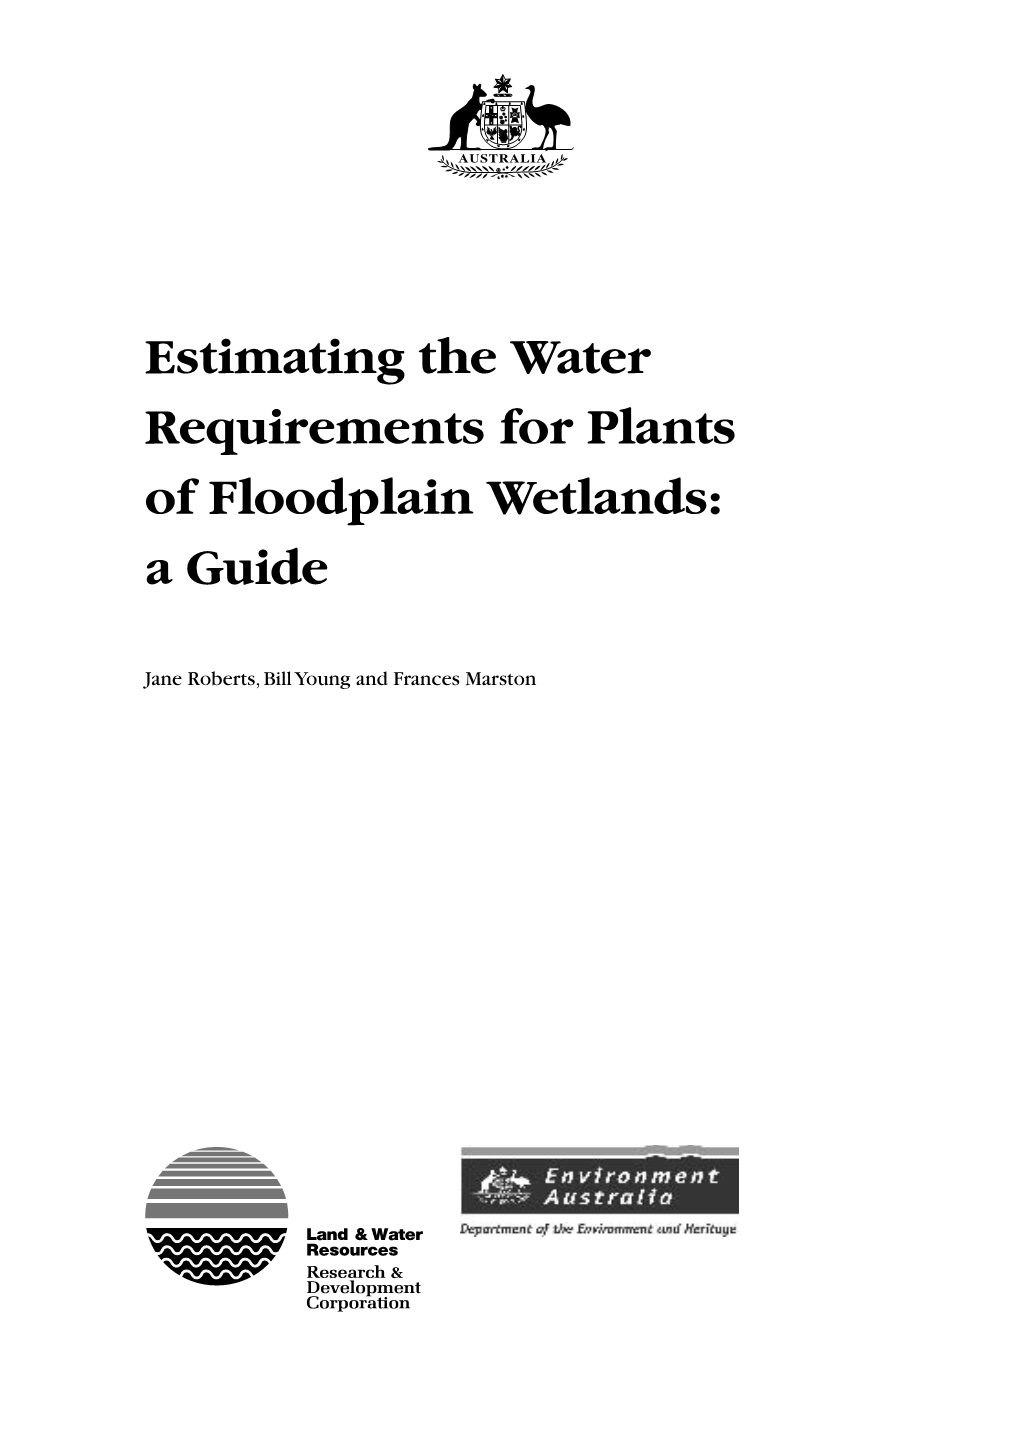 Estimating the Water Requirements for Plants of Floodplain Wetlands: a Guide